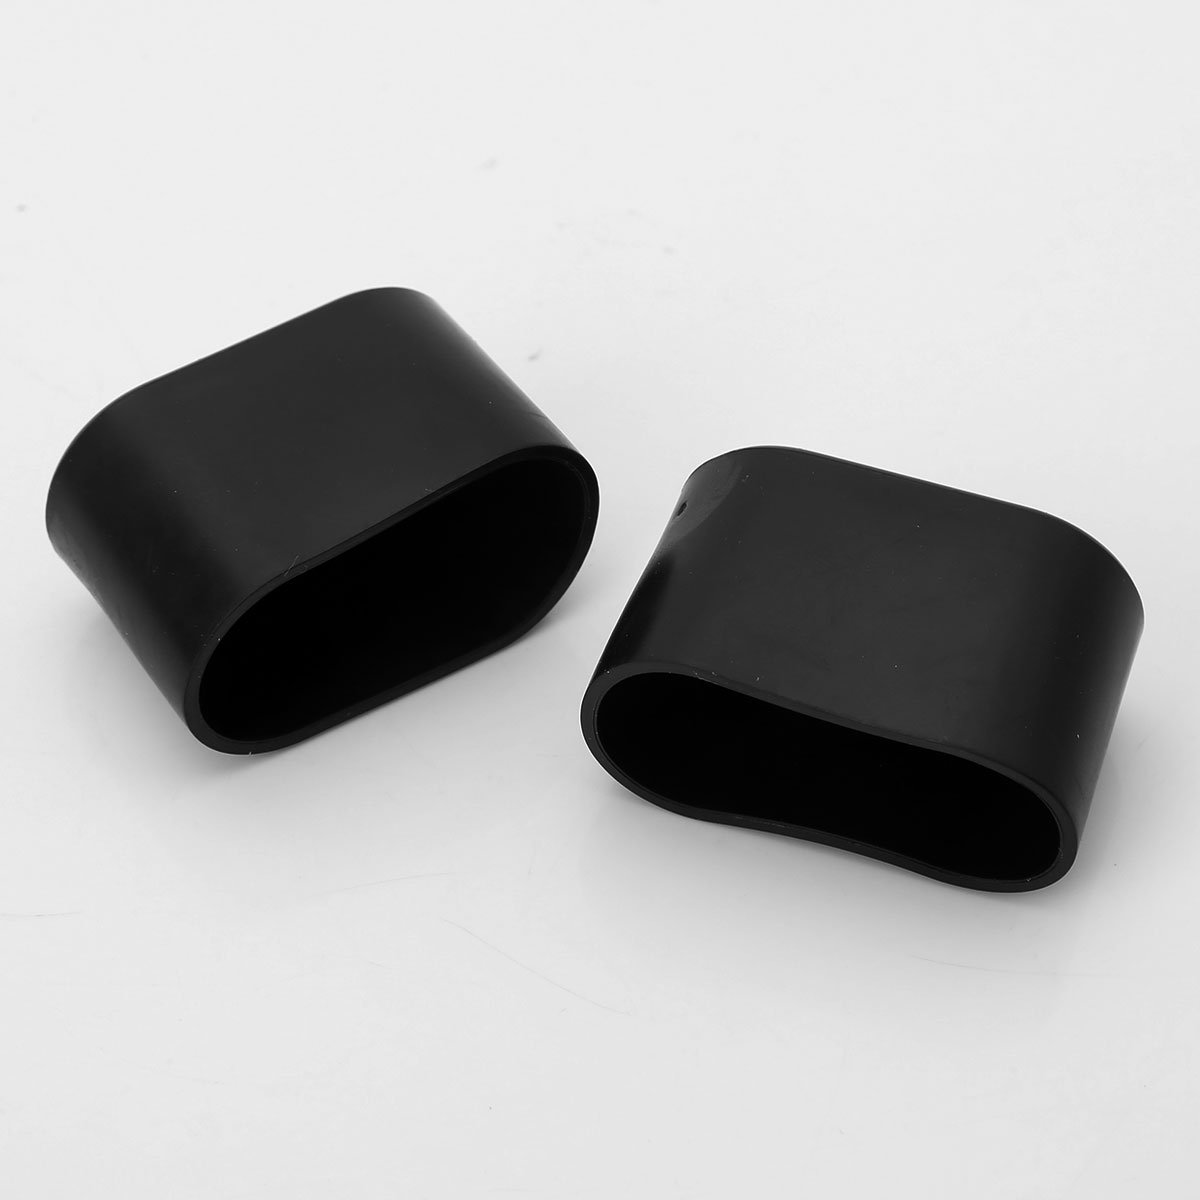 10Pcs Oval Shape Rubber Furniture Foot Table Chair Leg End Caps Covers Tips Caps Floor Protectors for Home Patio Garden Office